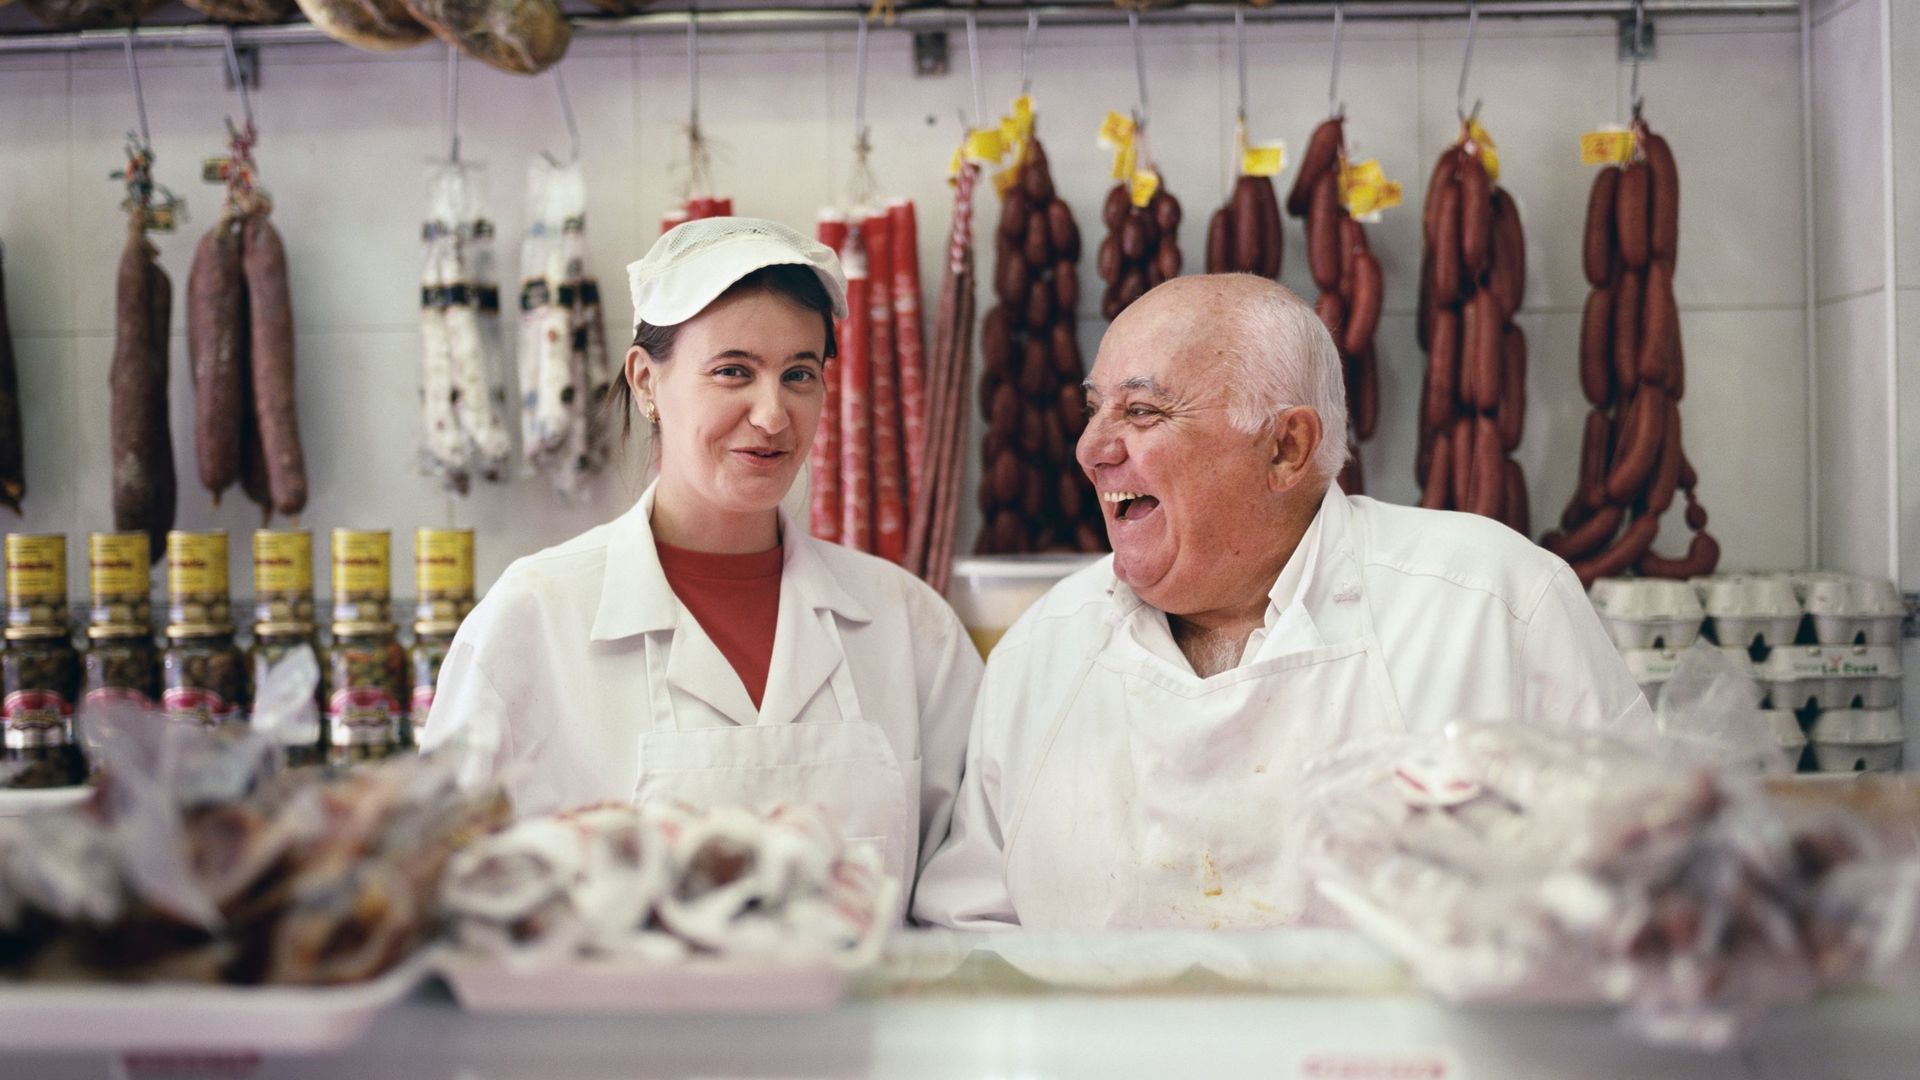 Family Butcher Business